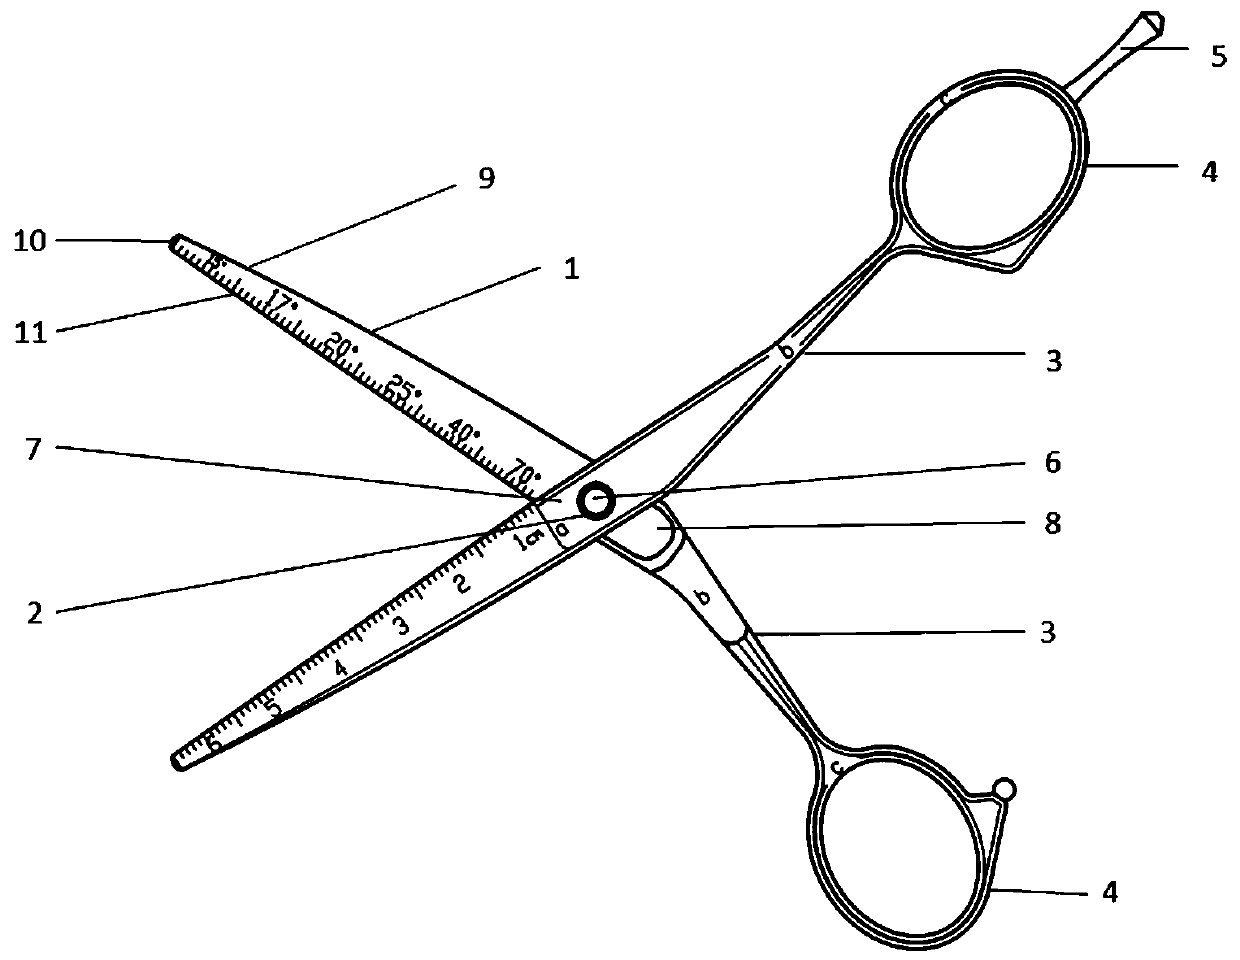 A kind of hairdressing scissors and its precise measuring and marking method